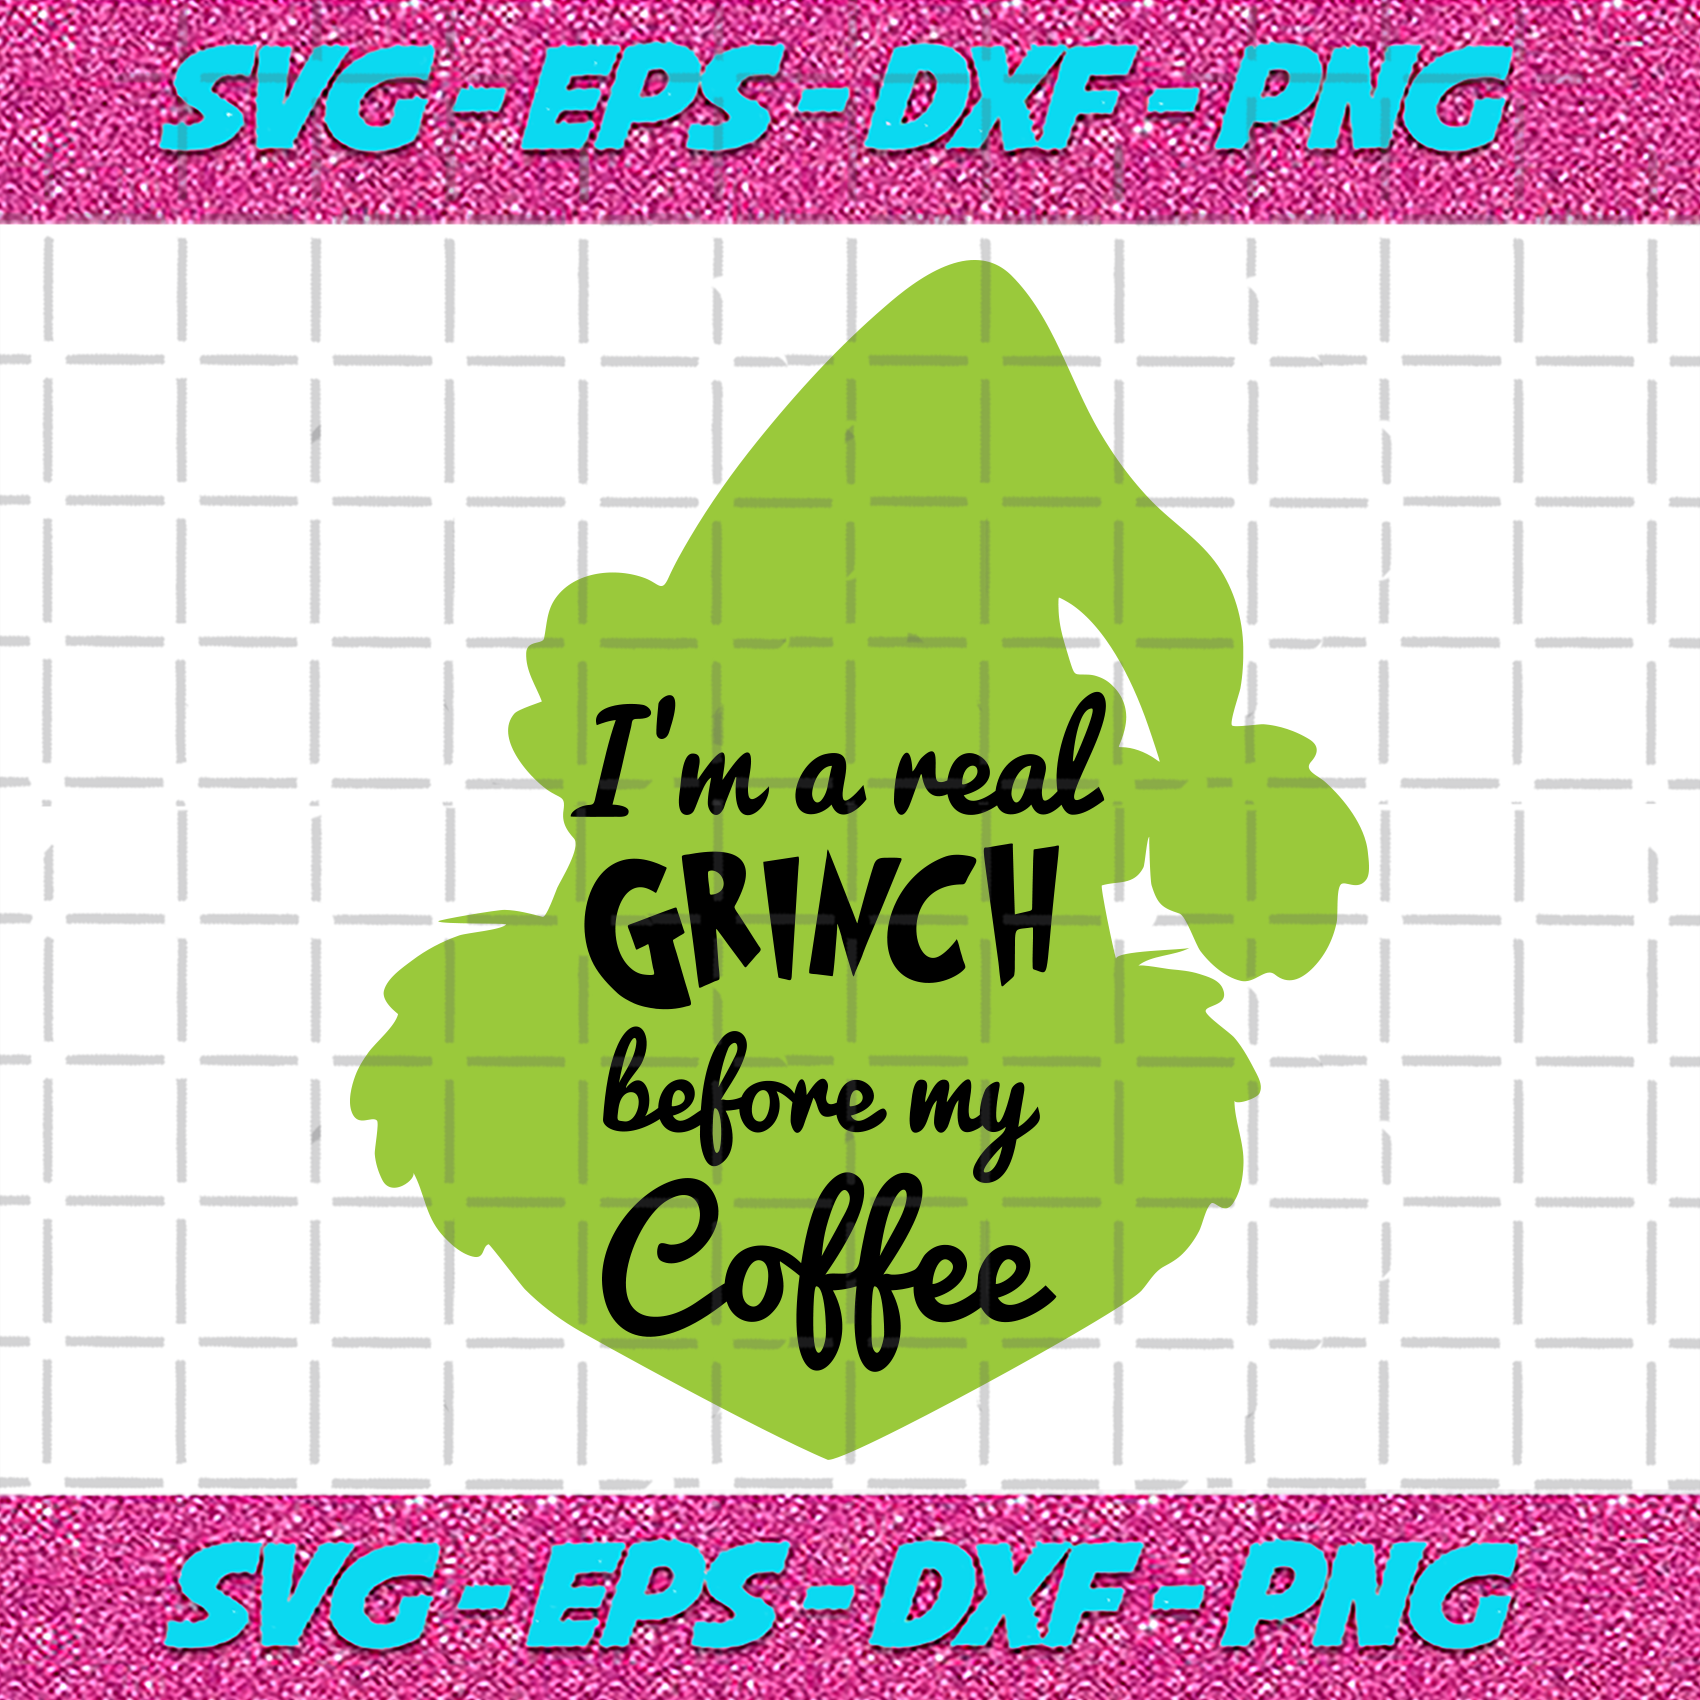 Download I Am A Real Grinch Before My Coffee Svg Christmas Svg Grinch Svg I Am A Grinch Svg Grinch Coffee Svg Grinch Face Svg Grinch Quotes Funny Grinch Svg Christmas Gifts Christmas